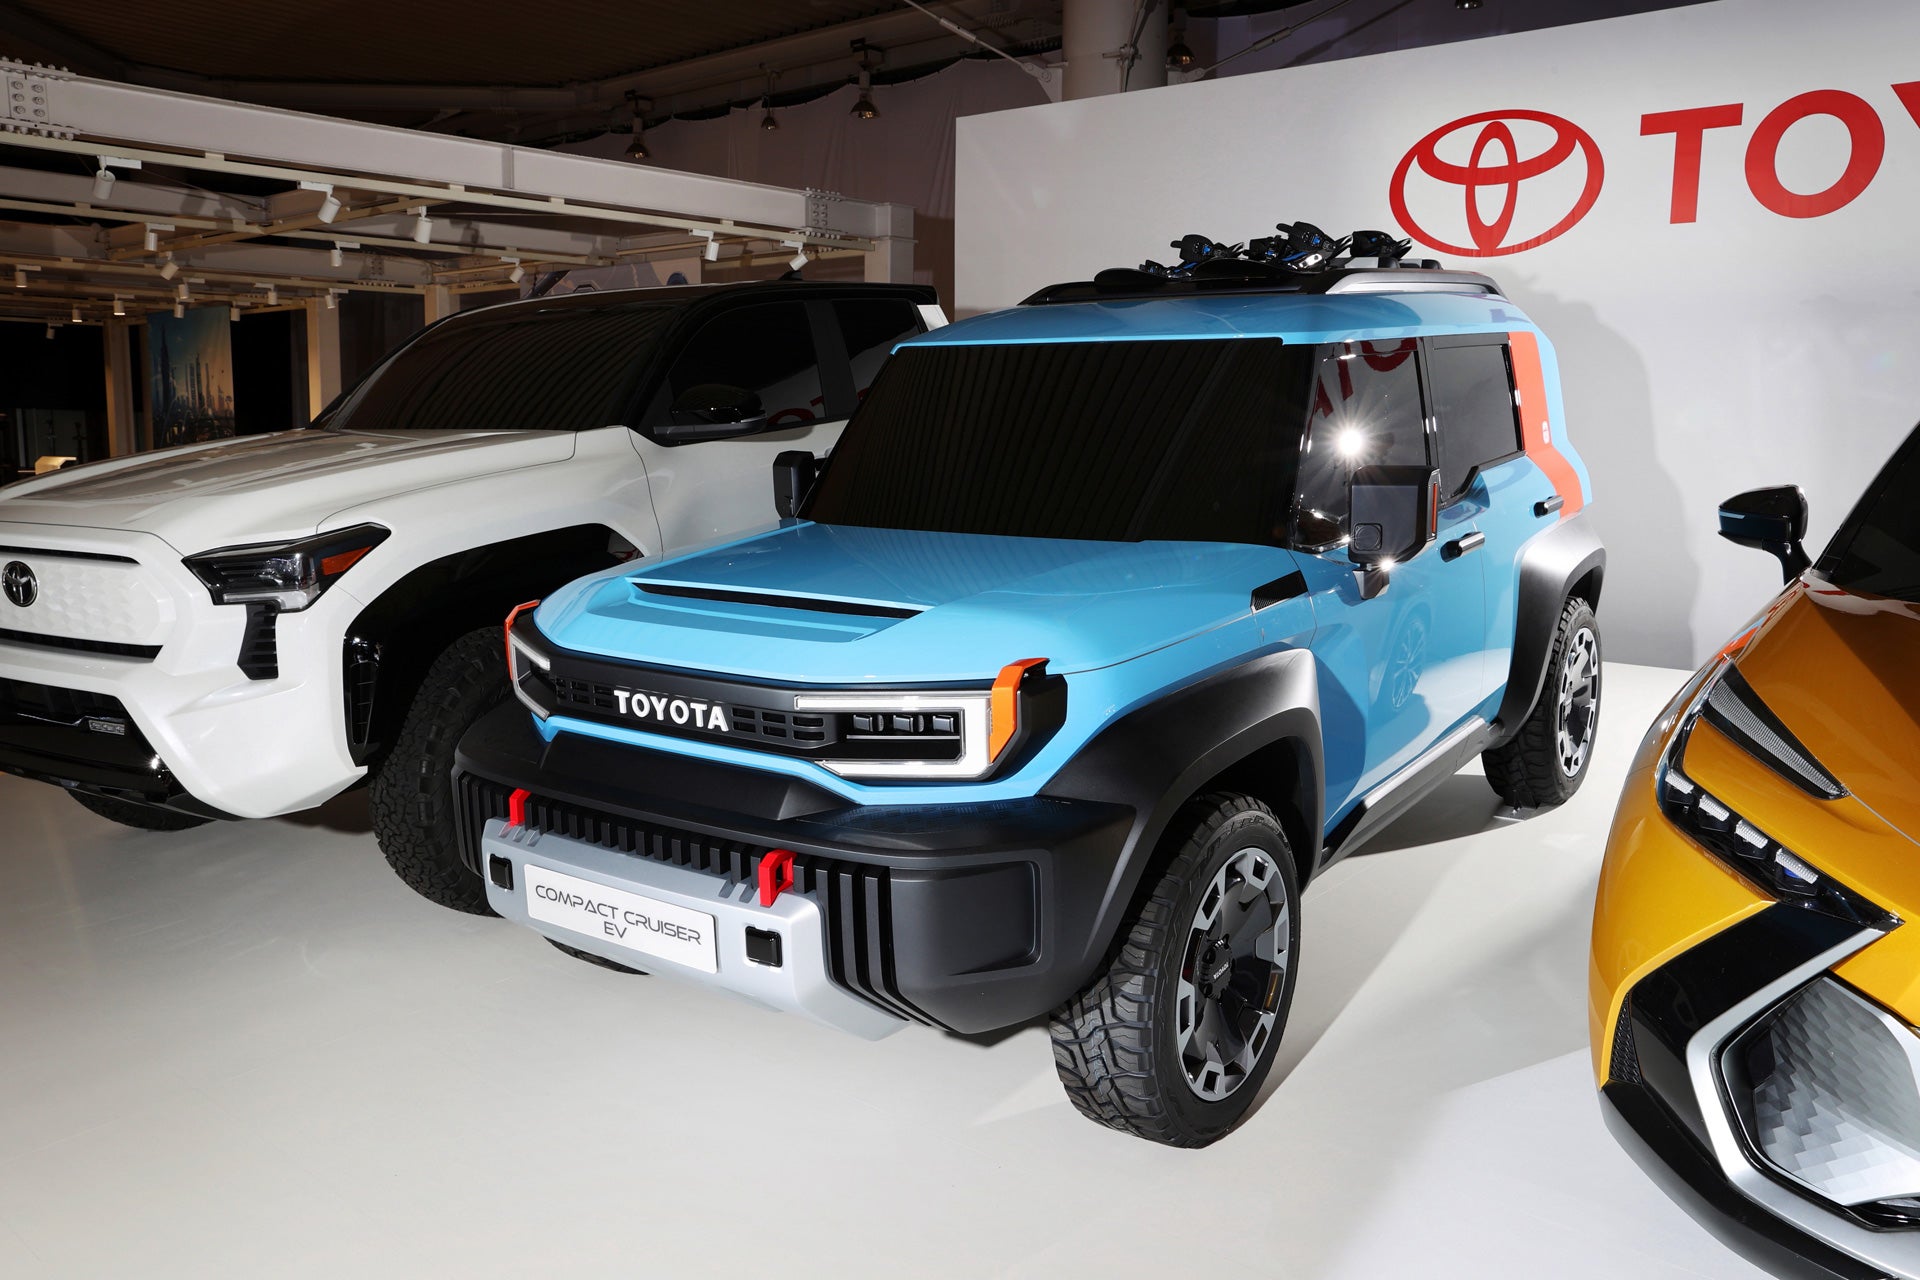 Toyota’s President Just Revealed This Epic Electric Off-Road SUV And Now I’m Obsessed